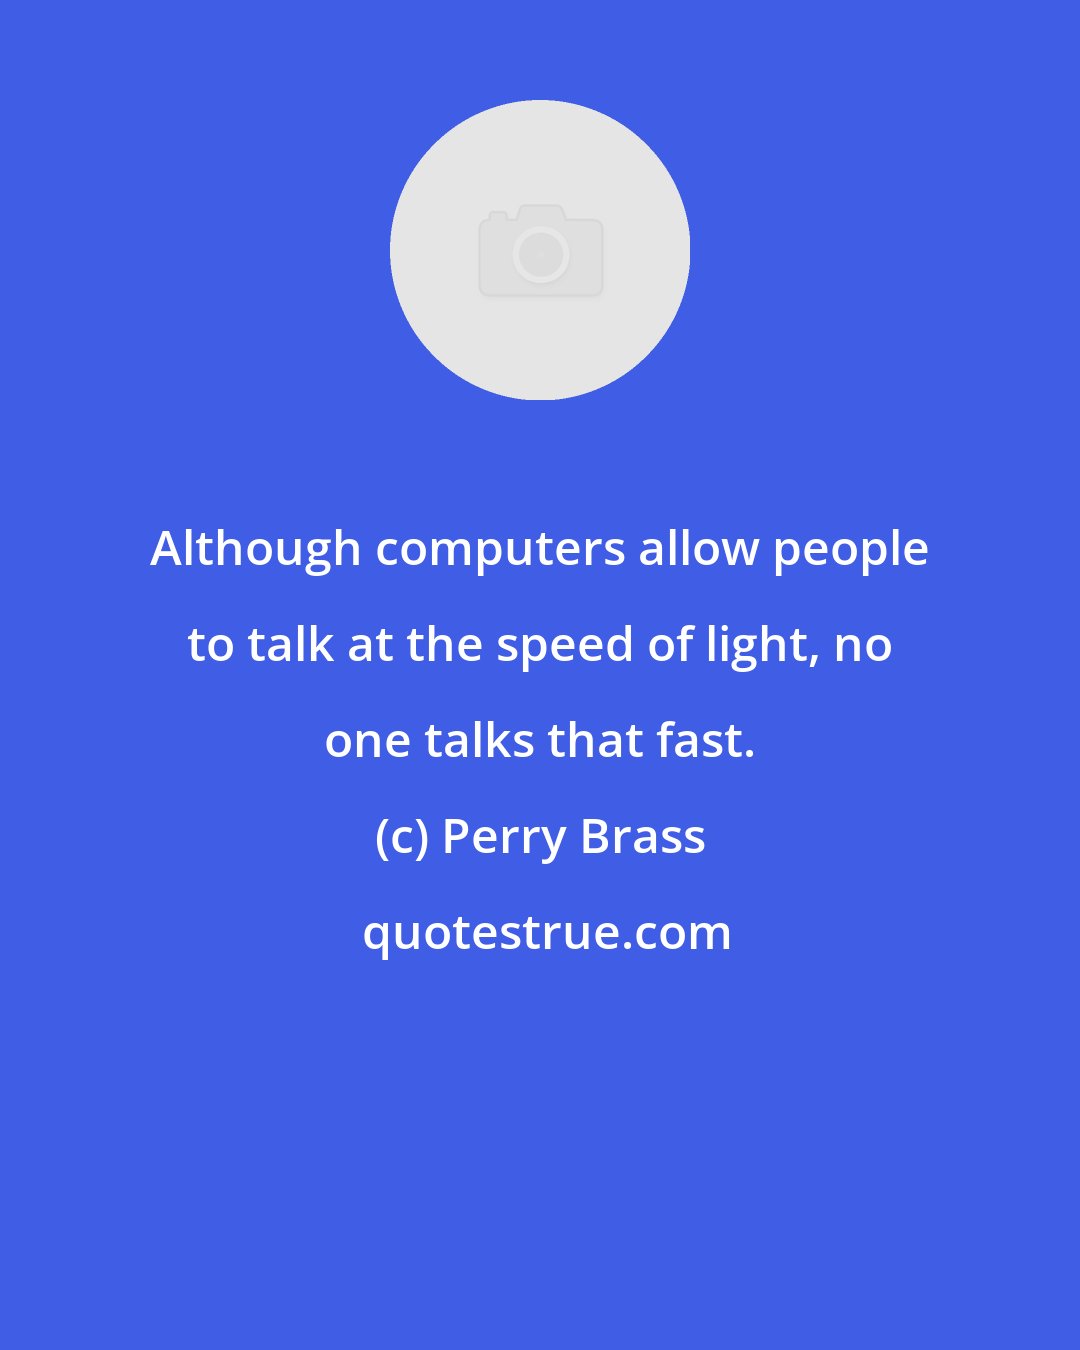 Perry Brass: Although computers allow people to talk at the speed of light, no one talks that fast.